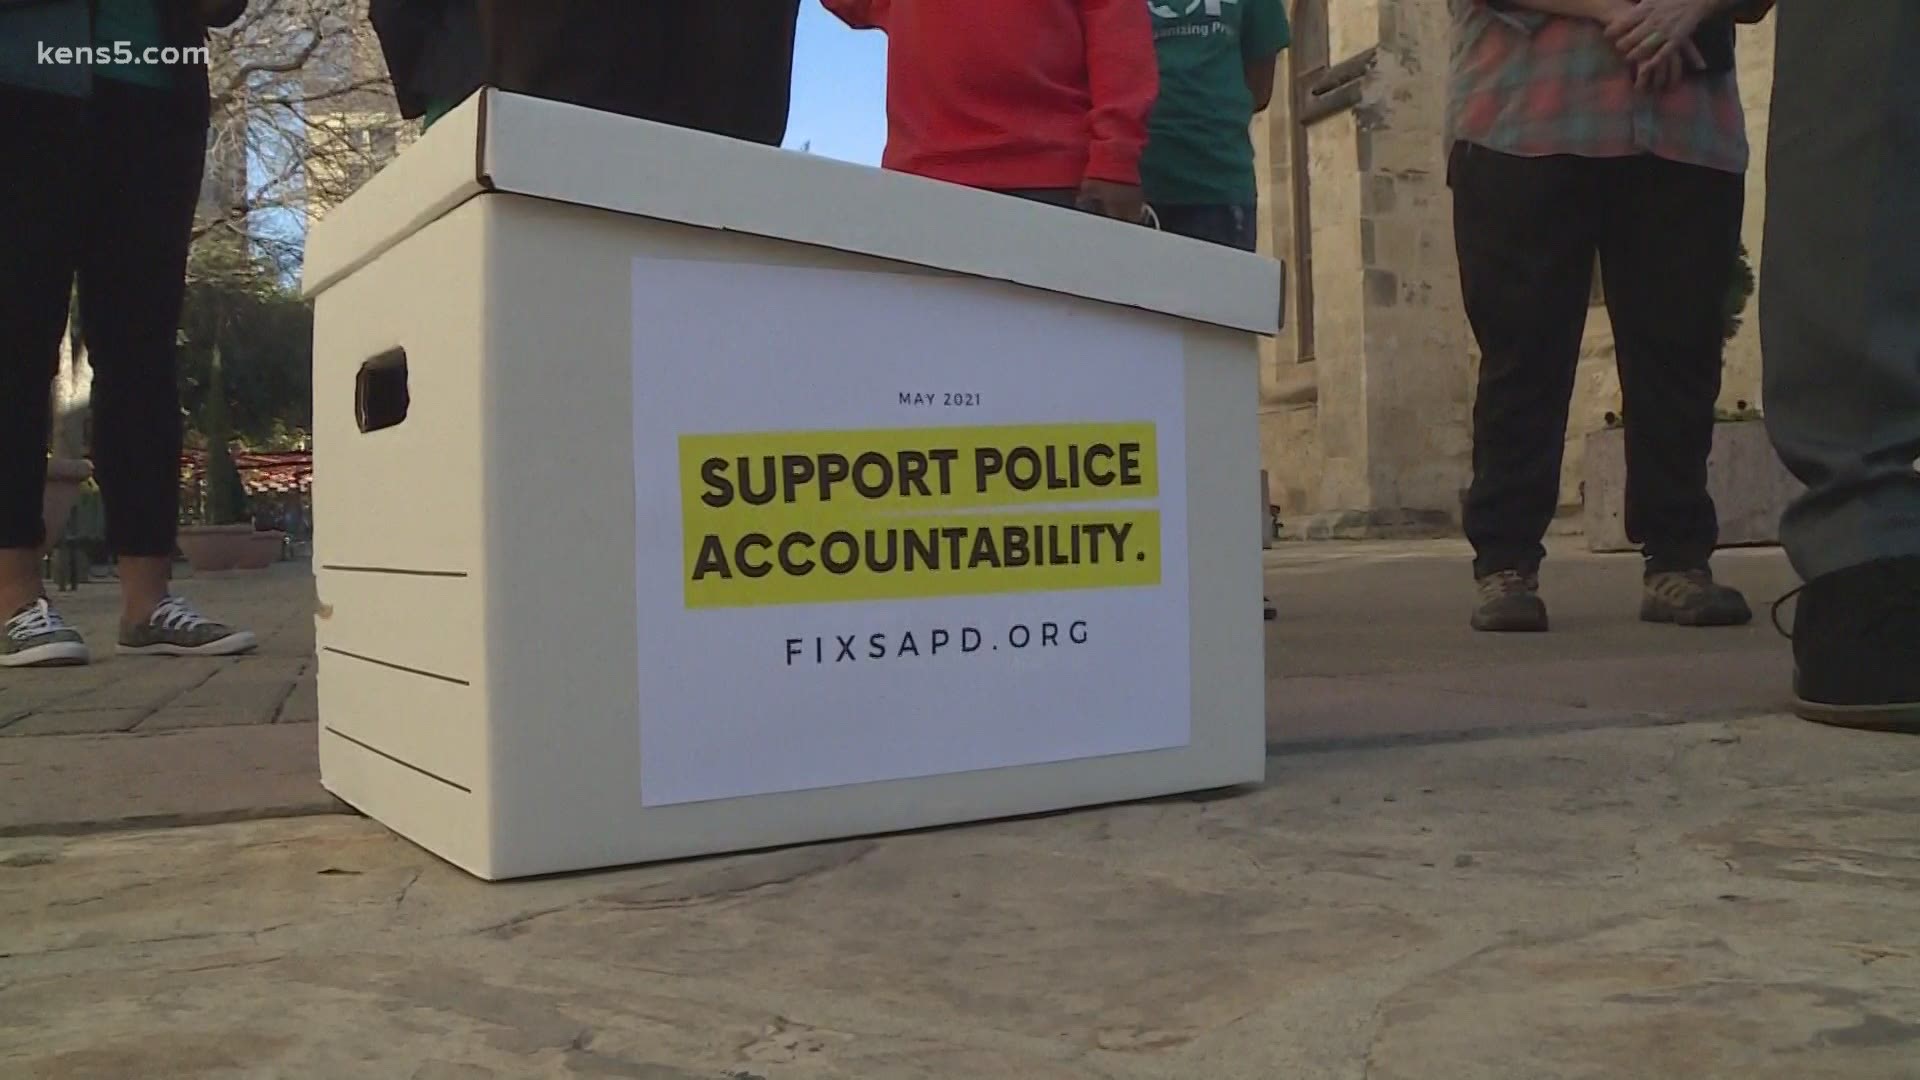 The petition was created by a local coalition demanding improved accountability measures from the San Antonio Police Department.